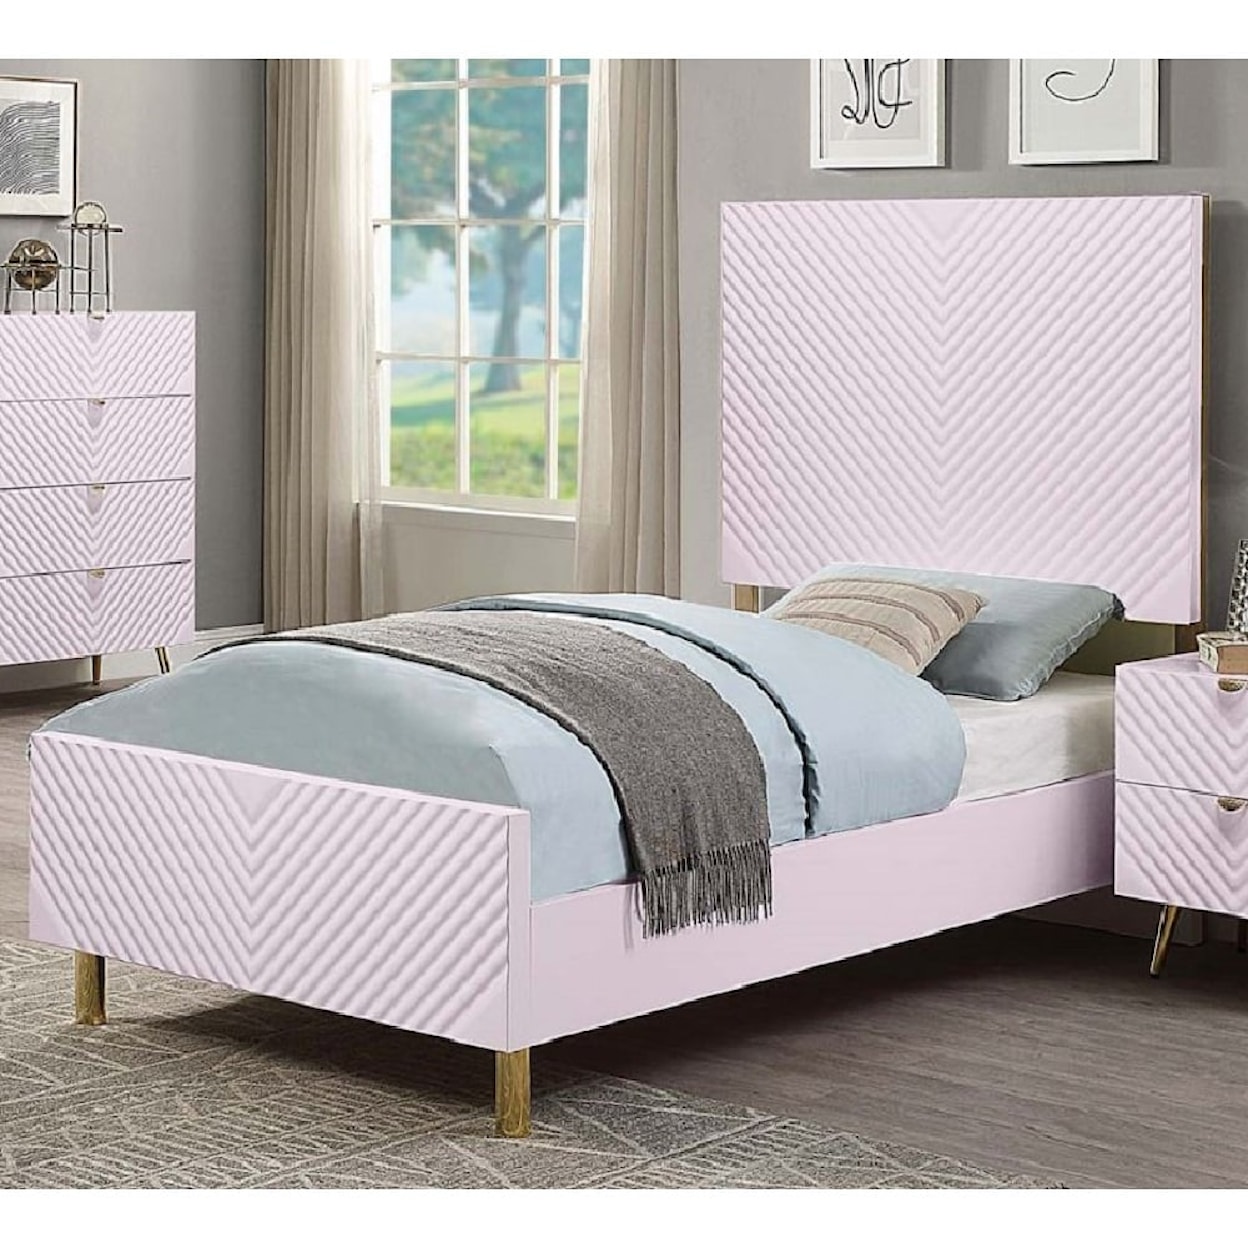 Acme Furniture Gaines Twin Bed